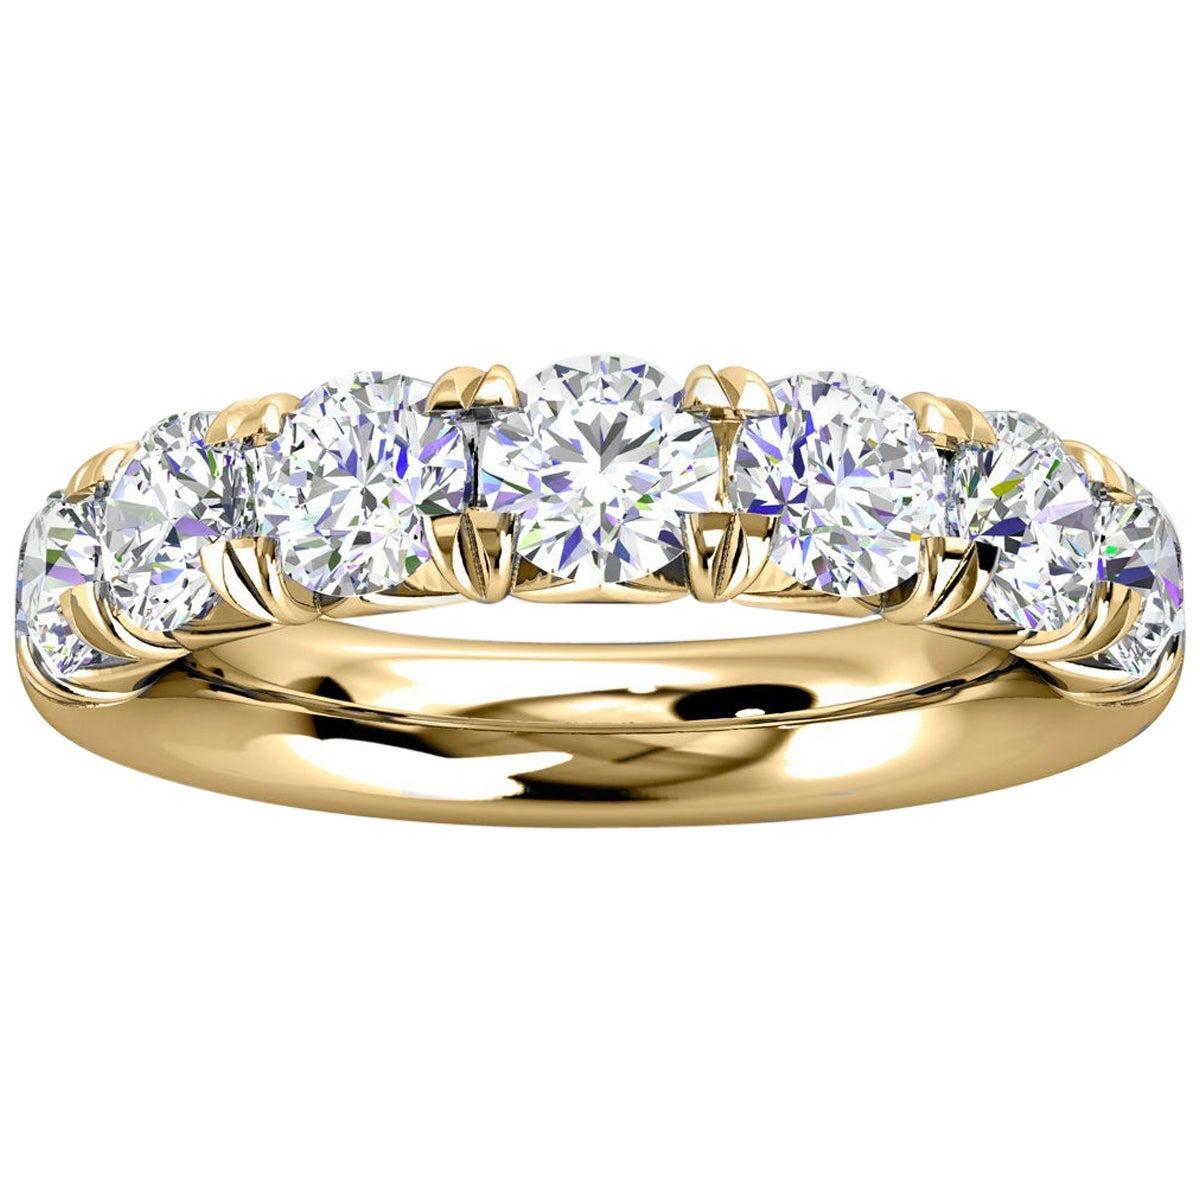 For Sale:  18k Yellow Gold Voyage French Pave Diamond Ring '2 Ct. Tw'